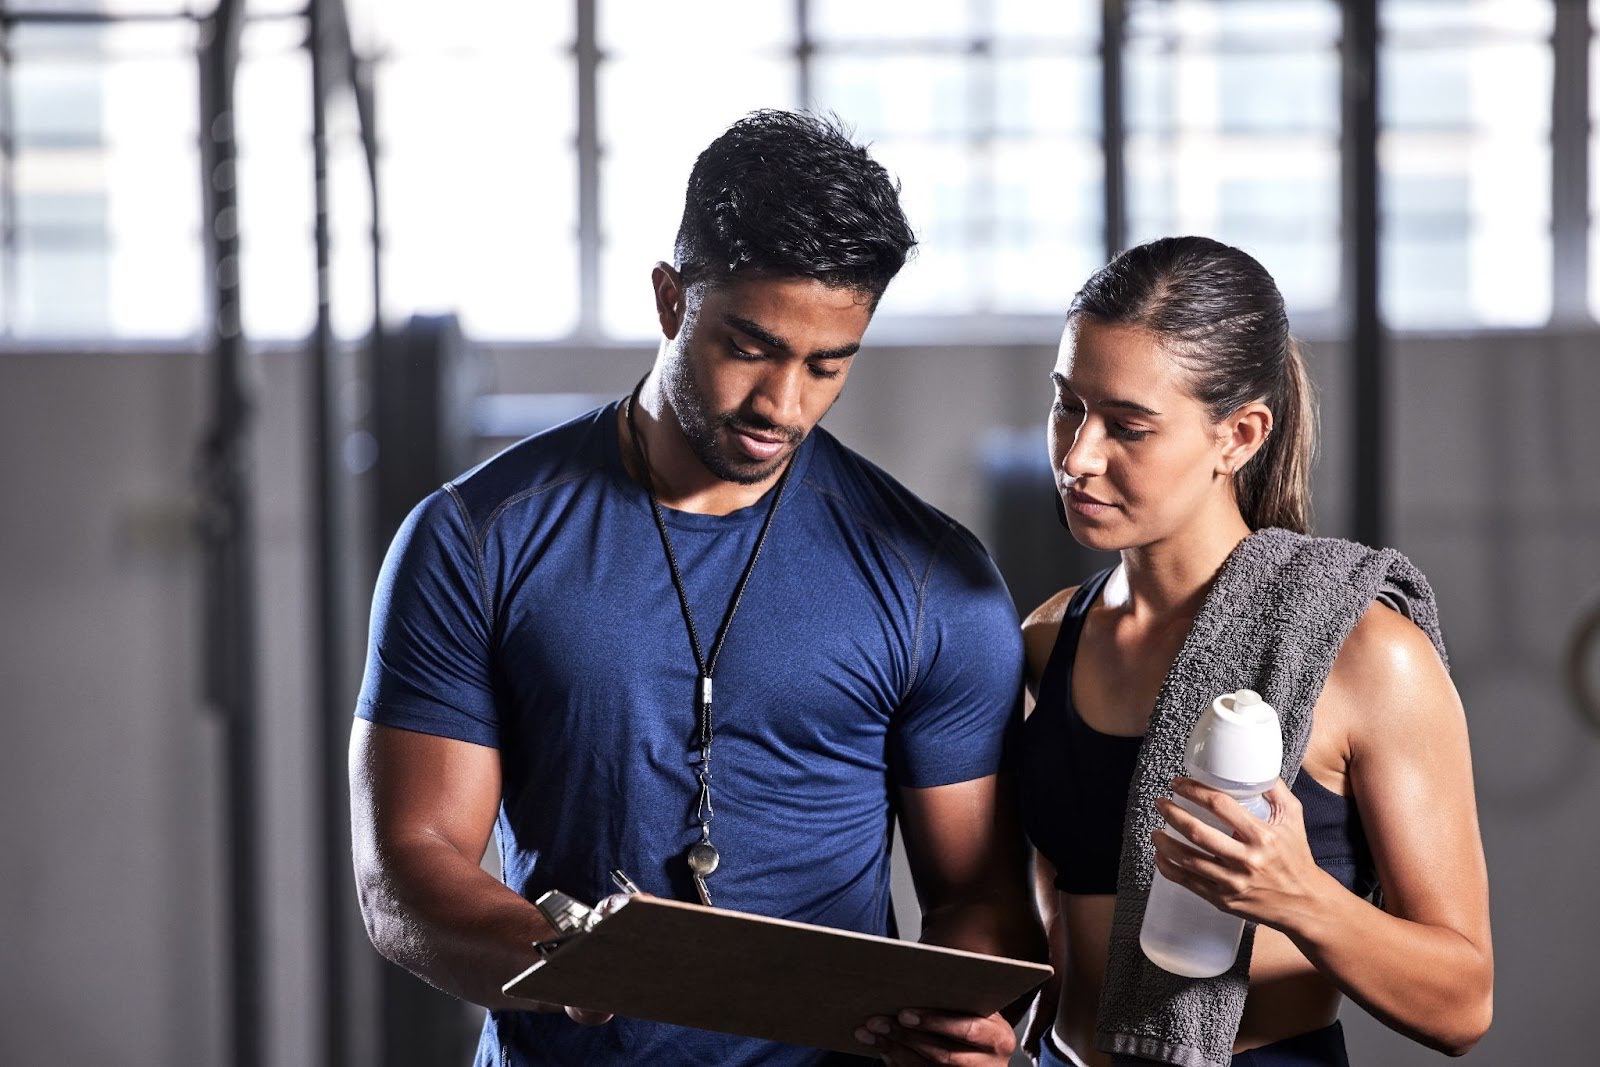 Personal trainer giving customized guidance to a fitness challenger